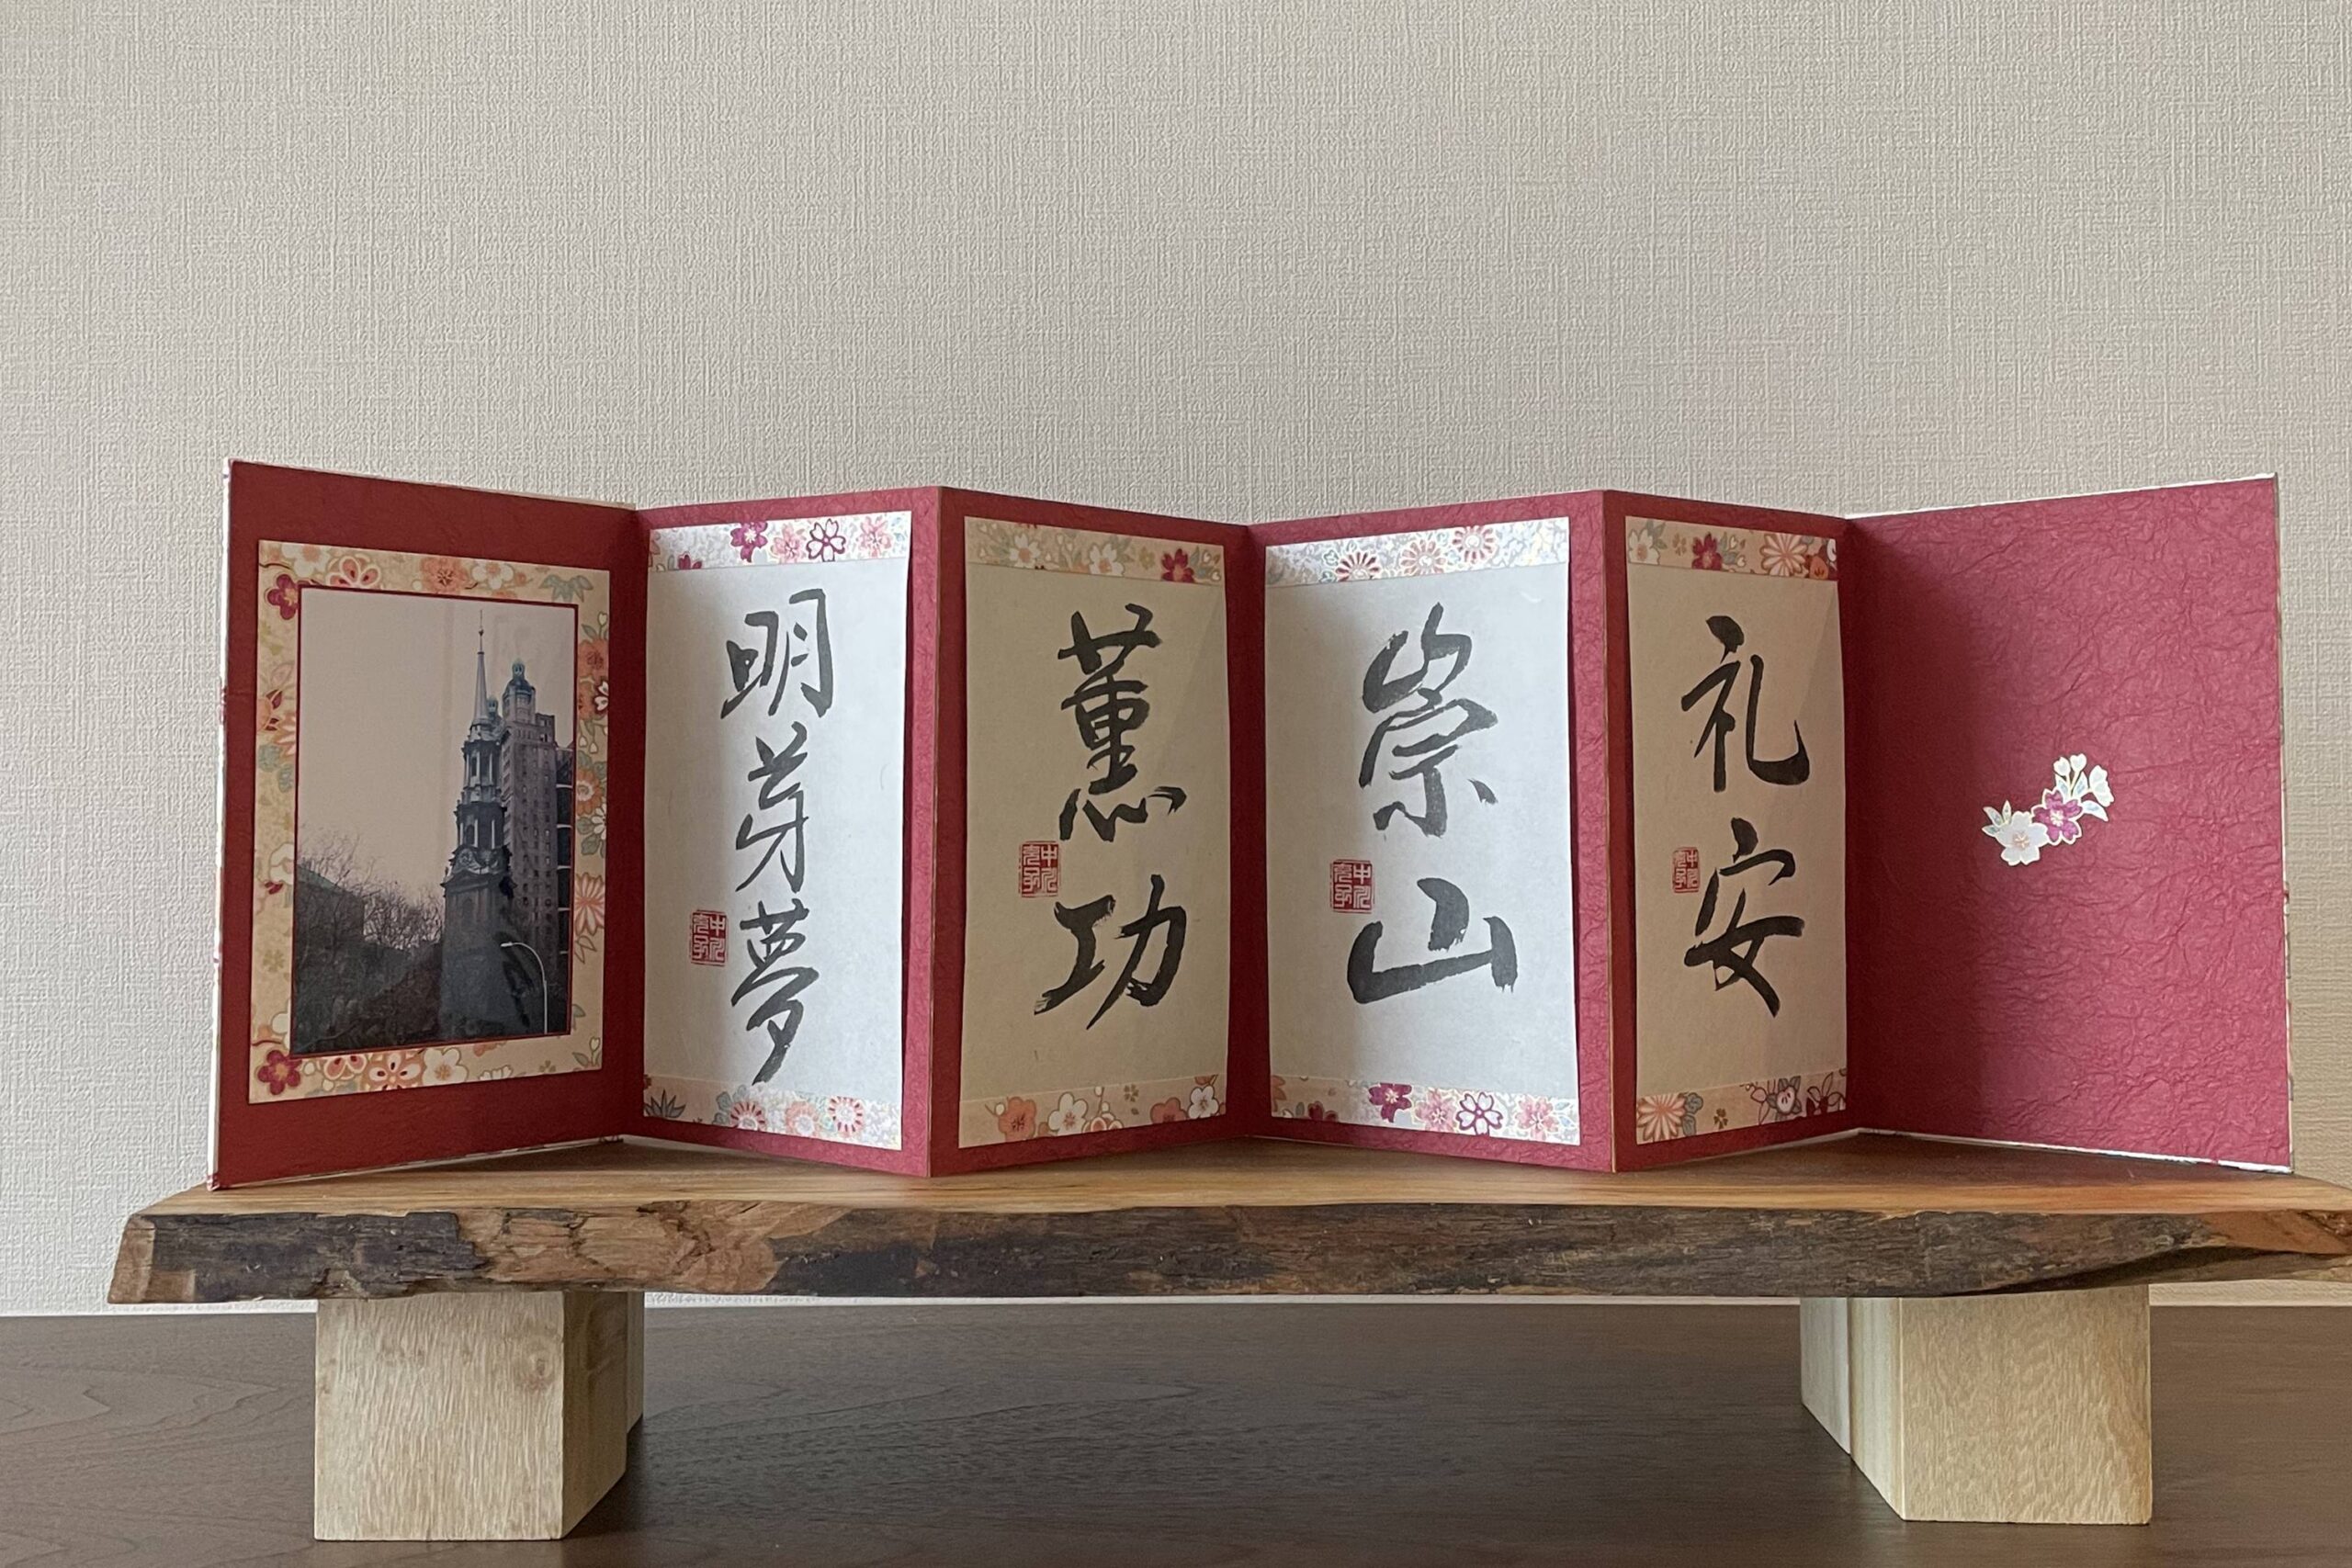 Scarlet Seal Booklet Type Goshuincho Calligraphy Works For Sale The Official Website Of Kanji De Sho And Calligrapher Shunyou Atsuko Nakagawa